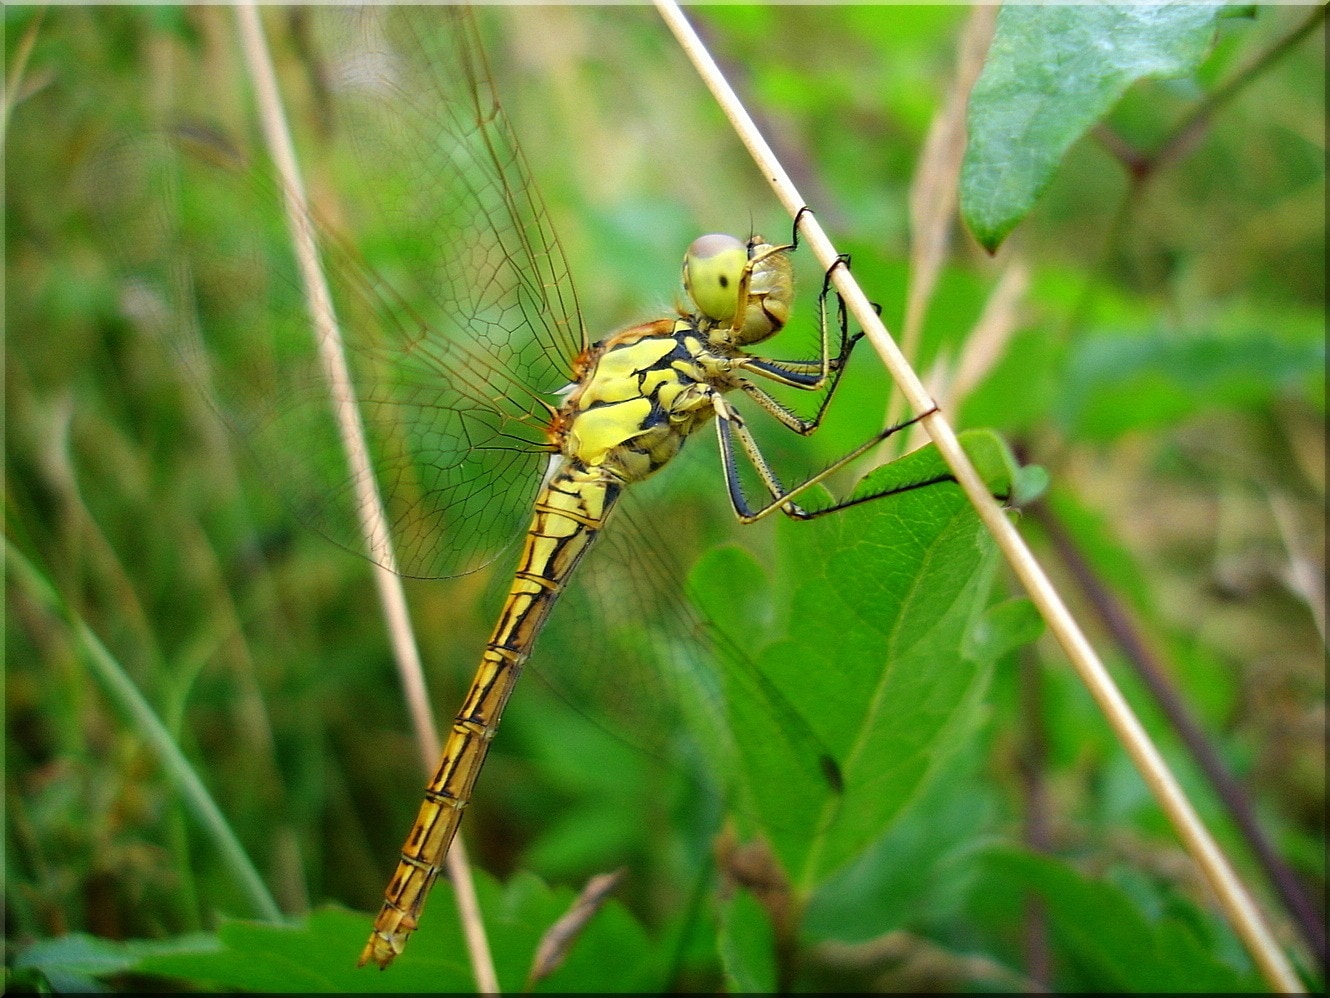 Dragonfly, Summer, Meadow, Insect, Close, one animal, insect